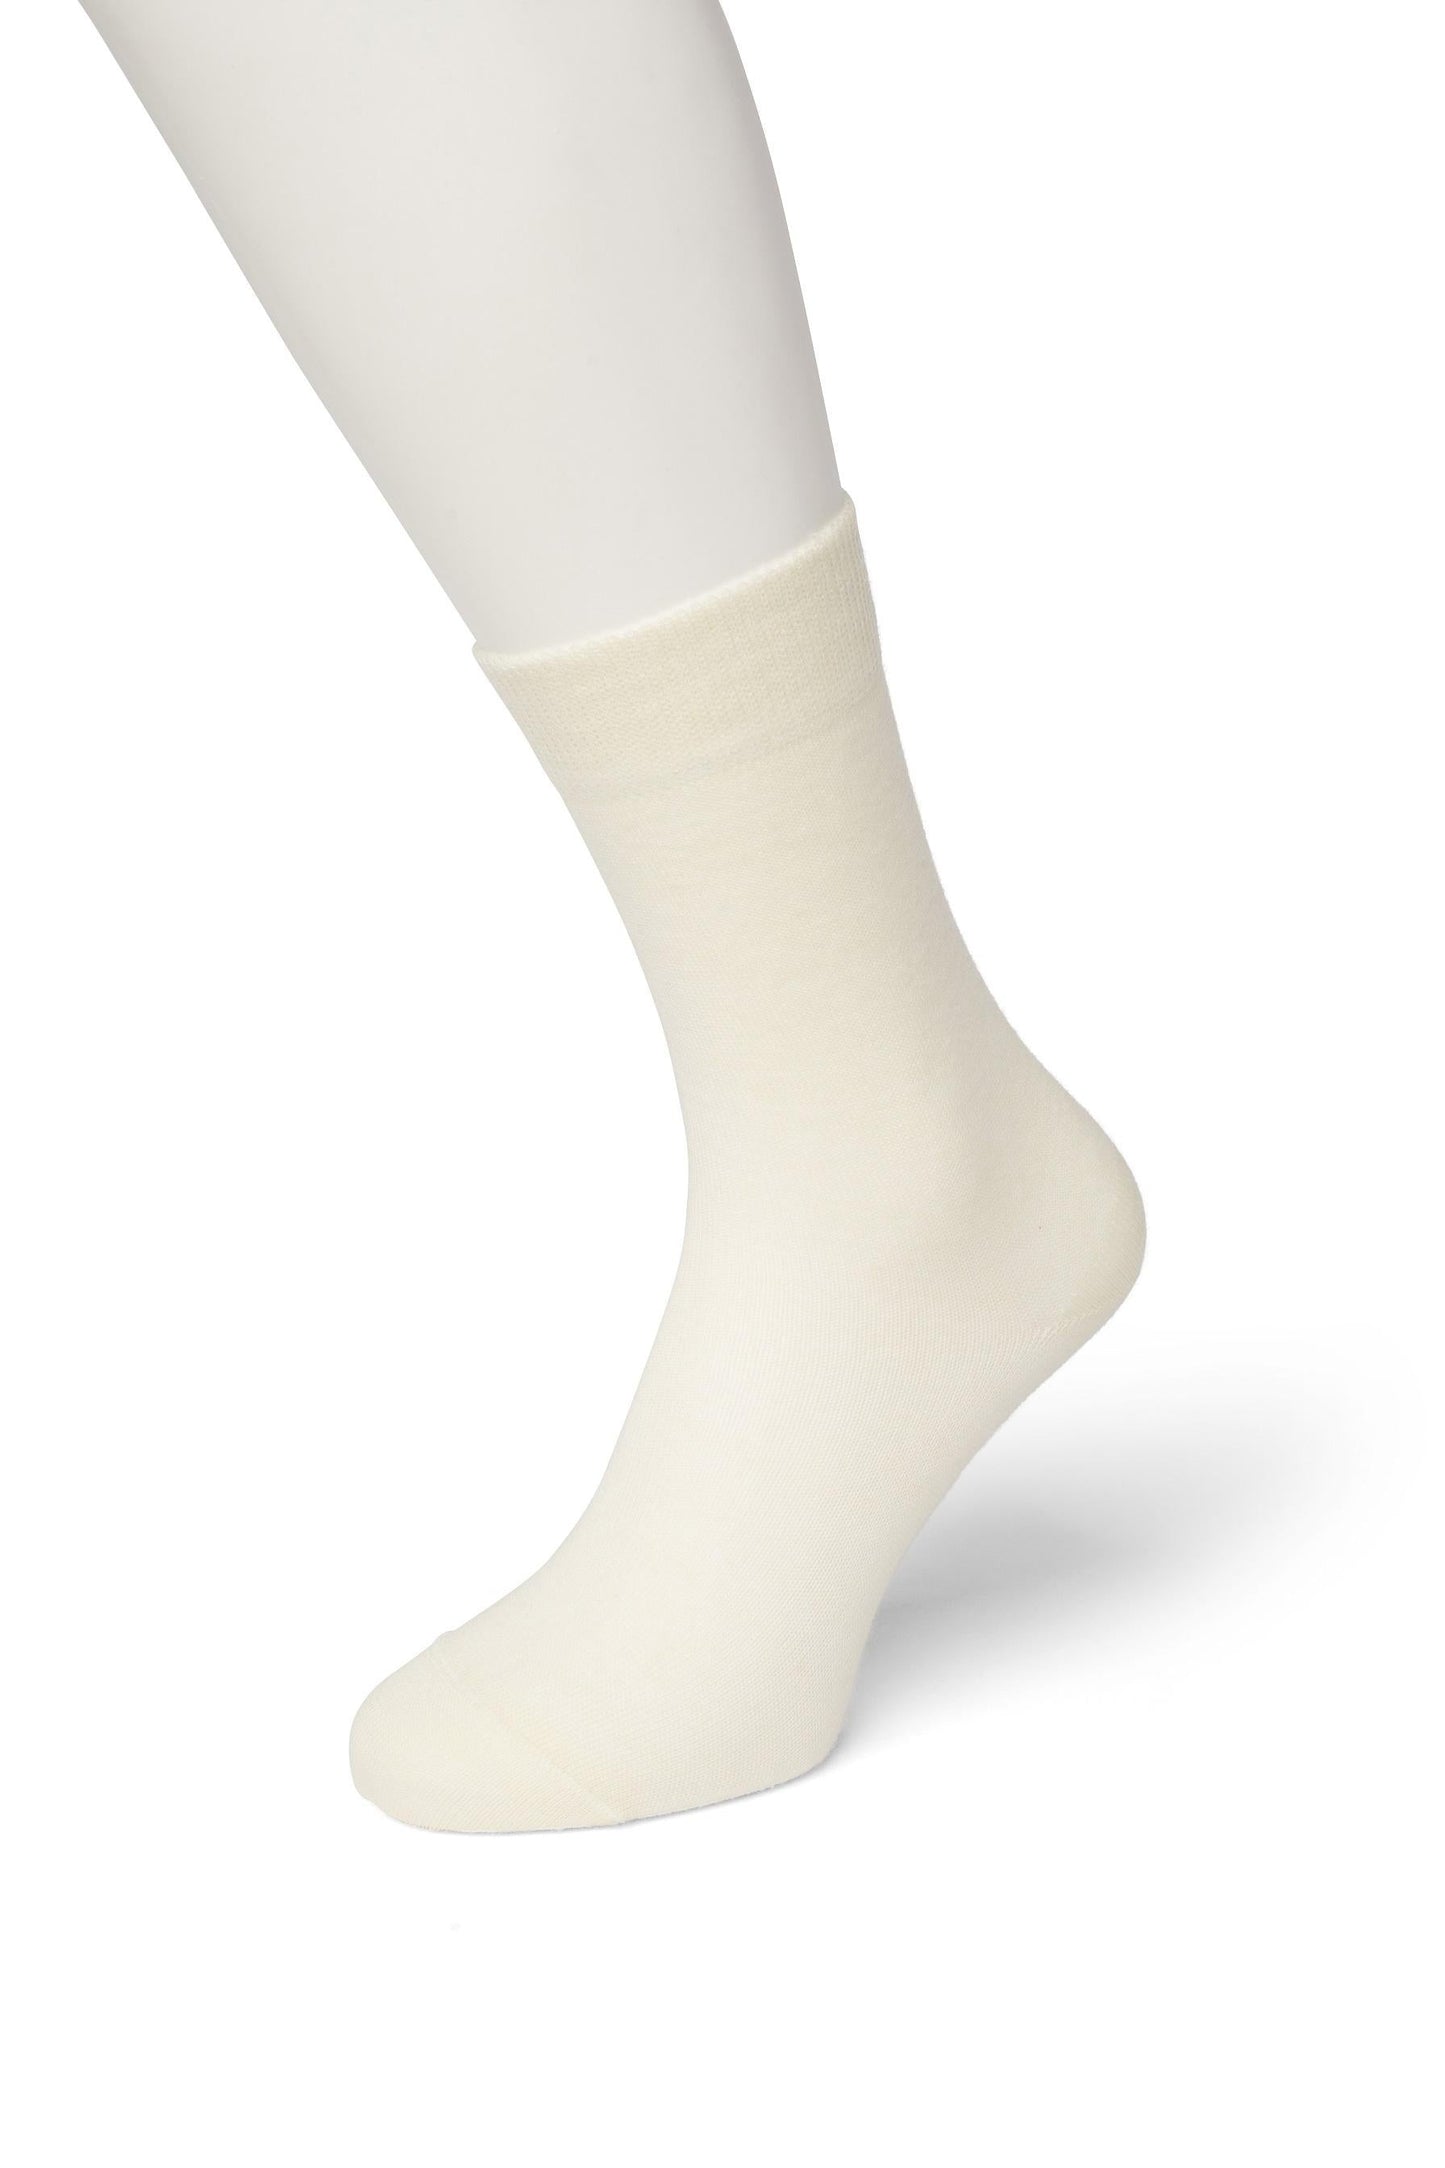 Bonnie Doon Wool/Cotton Sock BD631402 - Ivory / cream warm thermal ankle socks perfect for the cold Winter weather